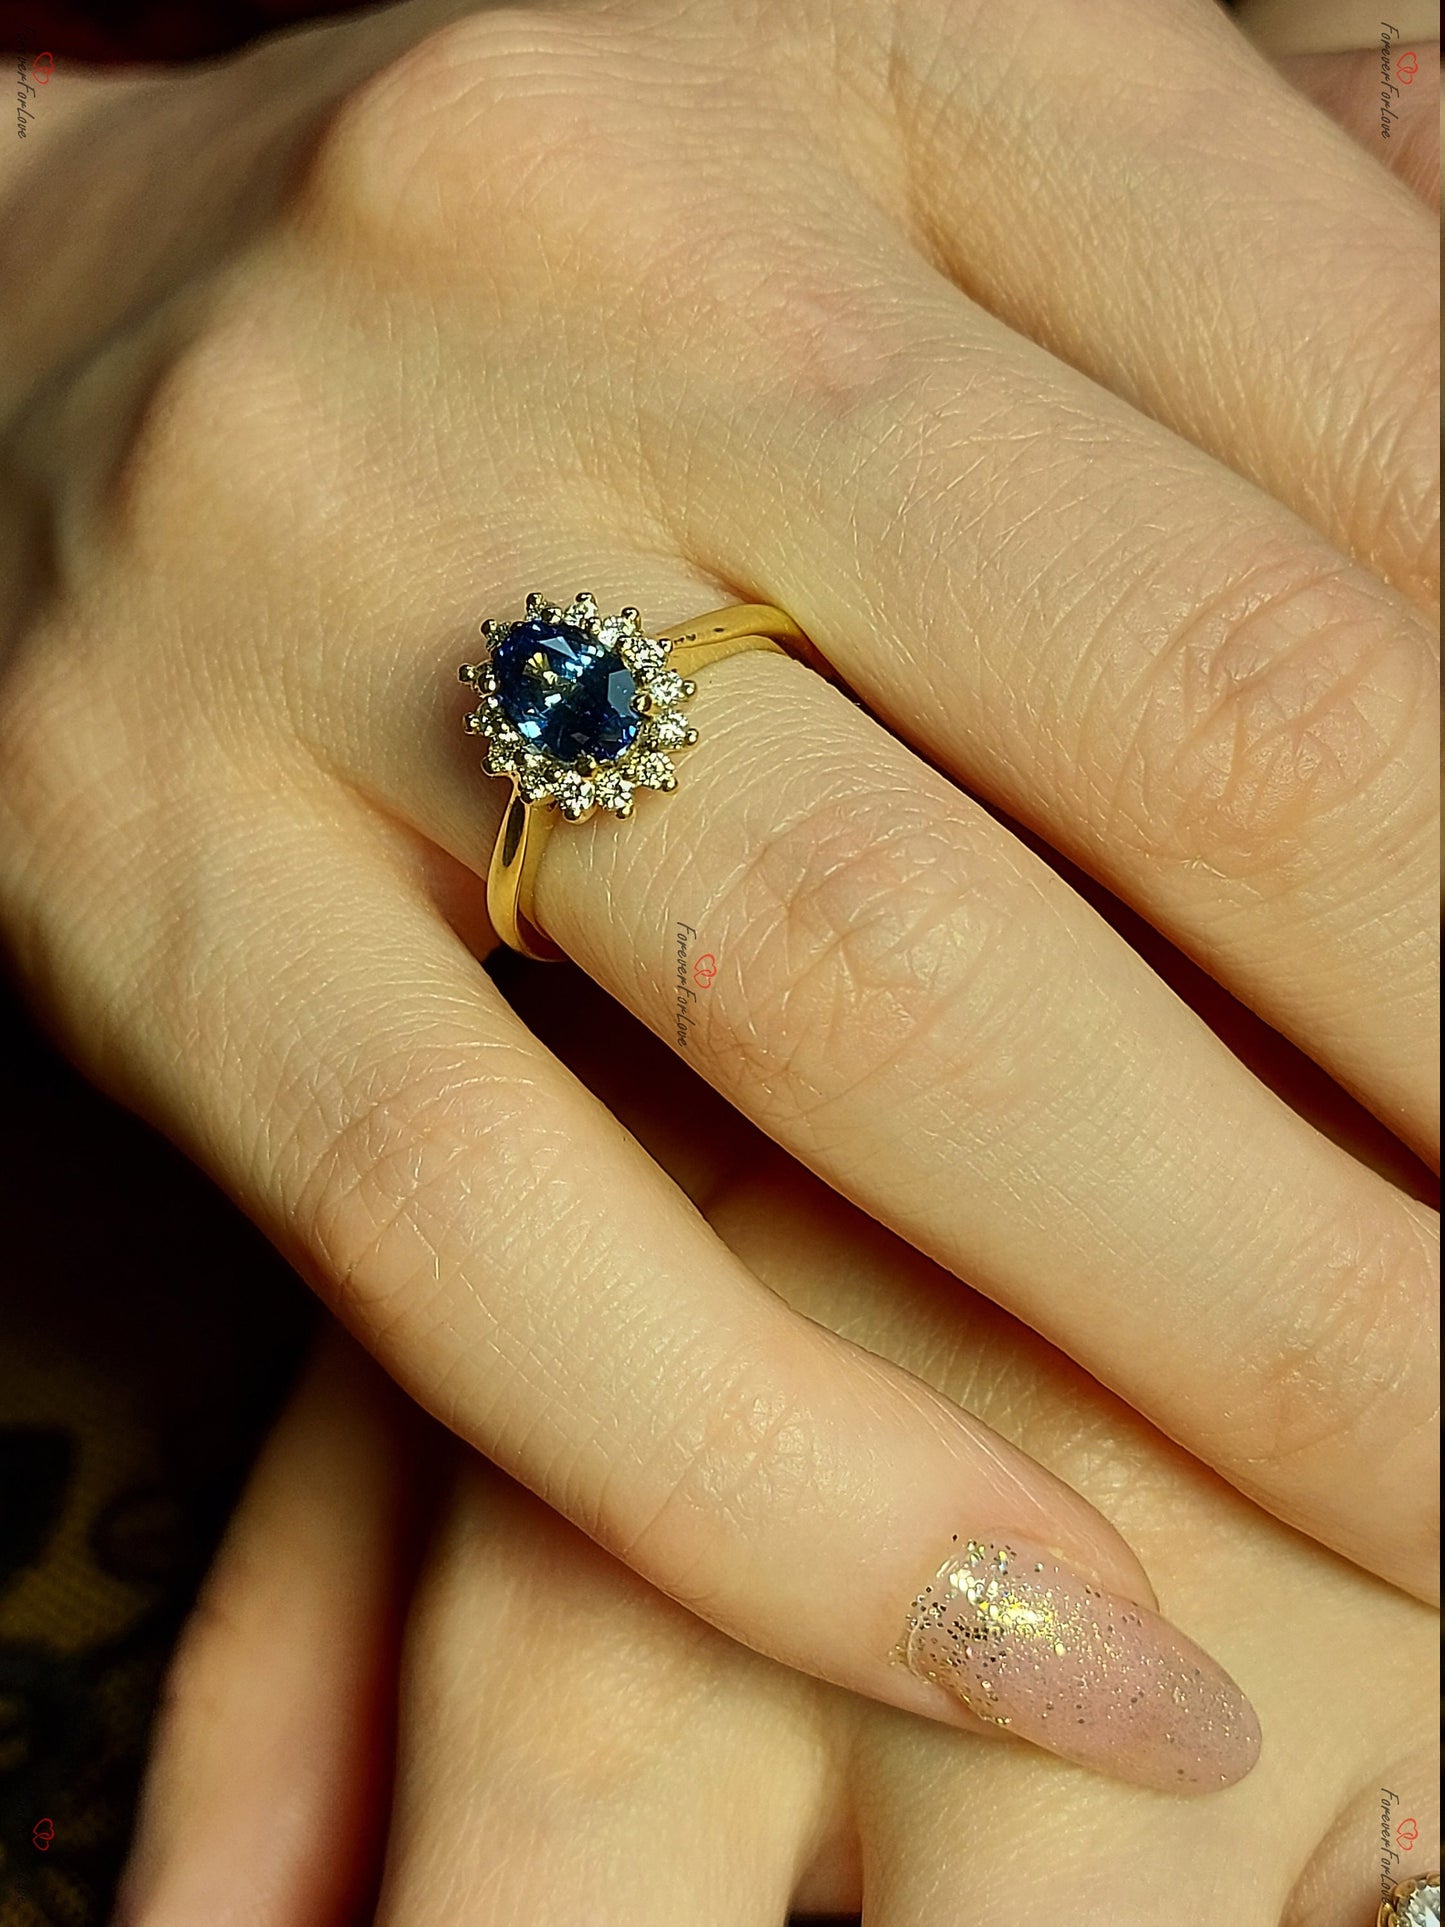 Oval Blue Sapphire ring, Oval Sapphire Diamond Ring, Diana Engagement Ring with Sapphire and Diamonds 14k yellow gold ring engagement ring